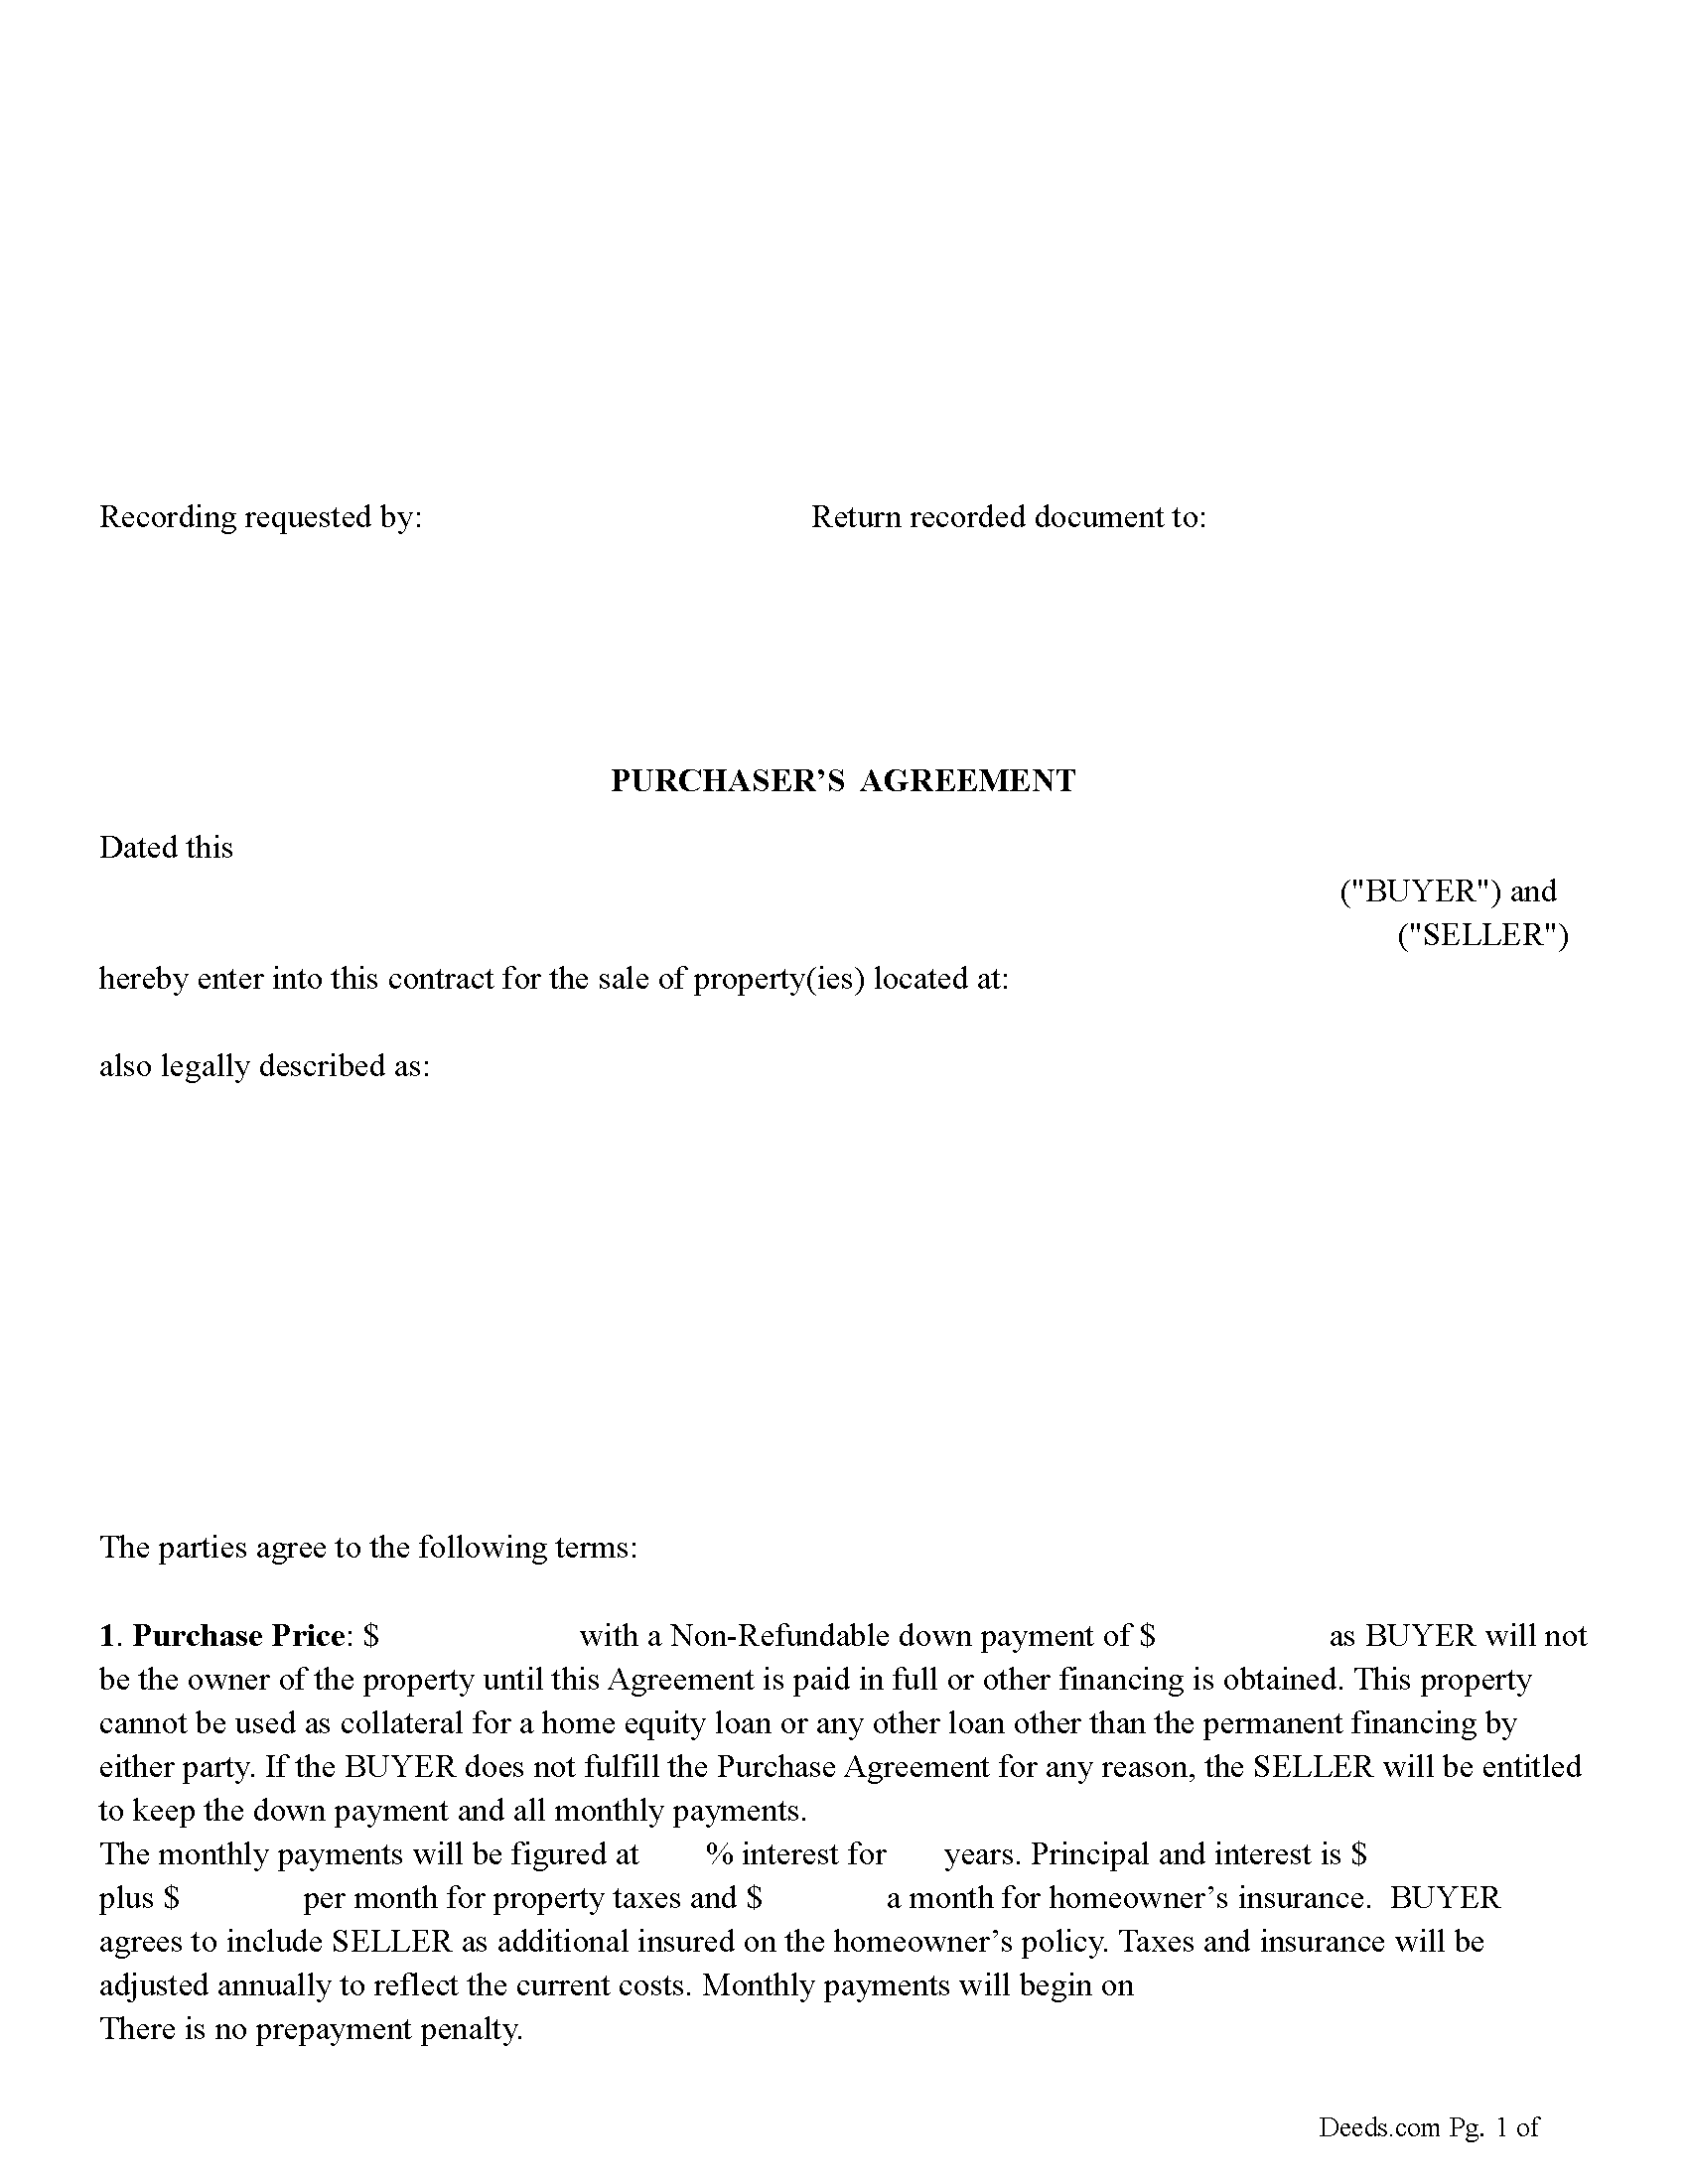 Purchaser's Agreement (with installment payments) Form